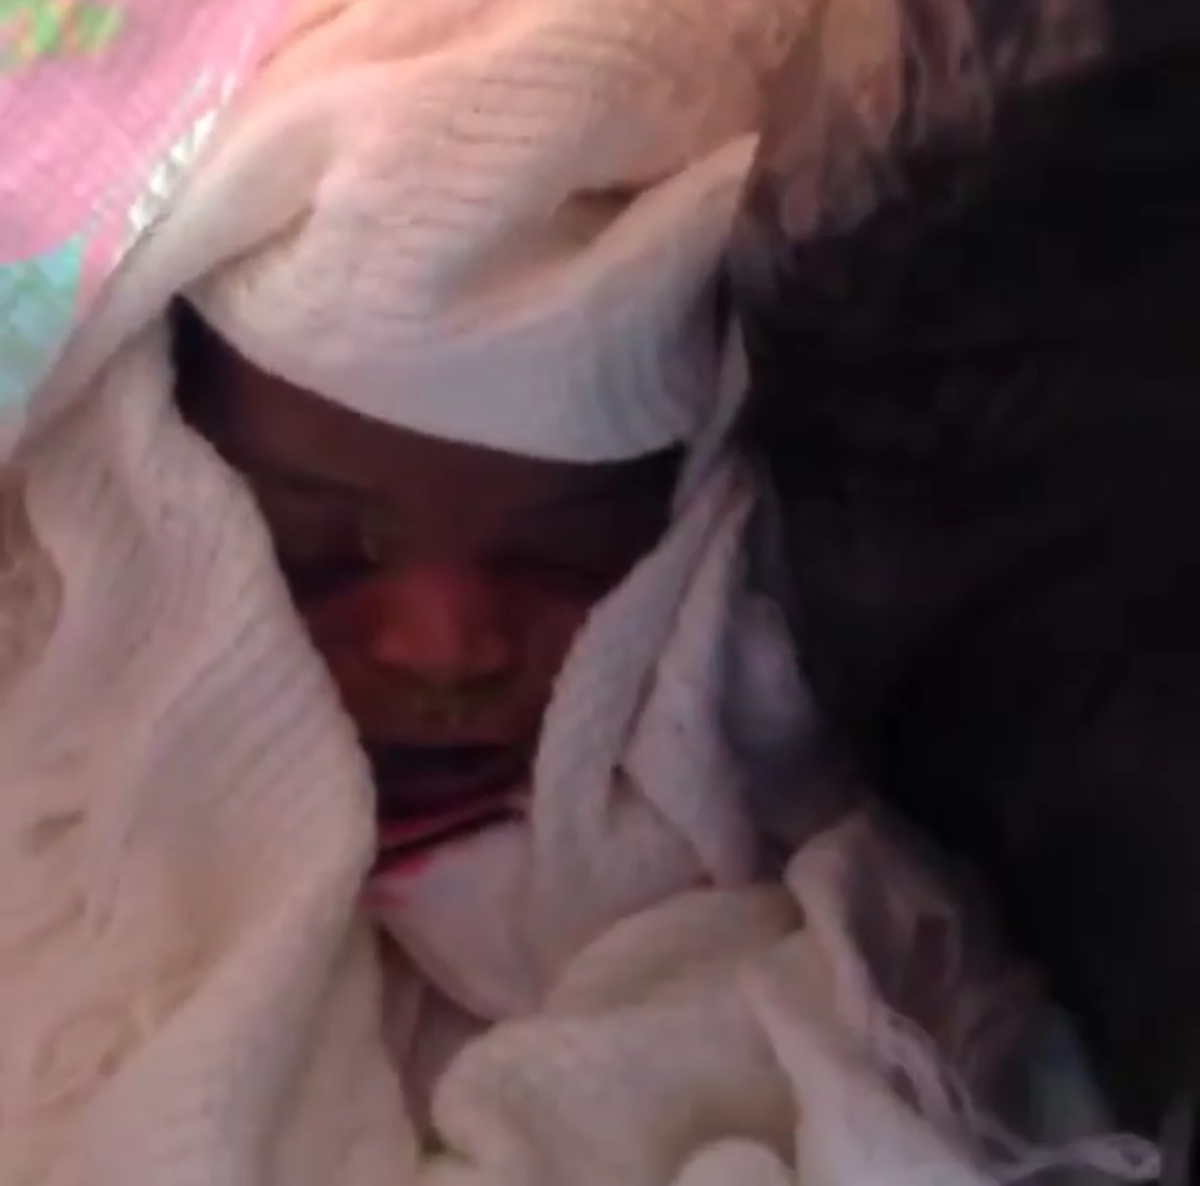 This Newborn Baby Suffocated To Death After Being Abandoned Inside A Bag In Lagos